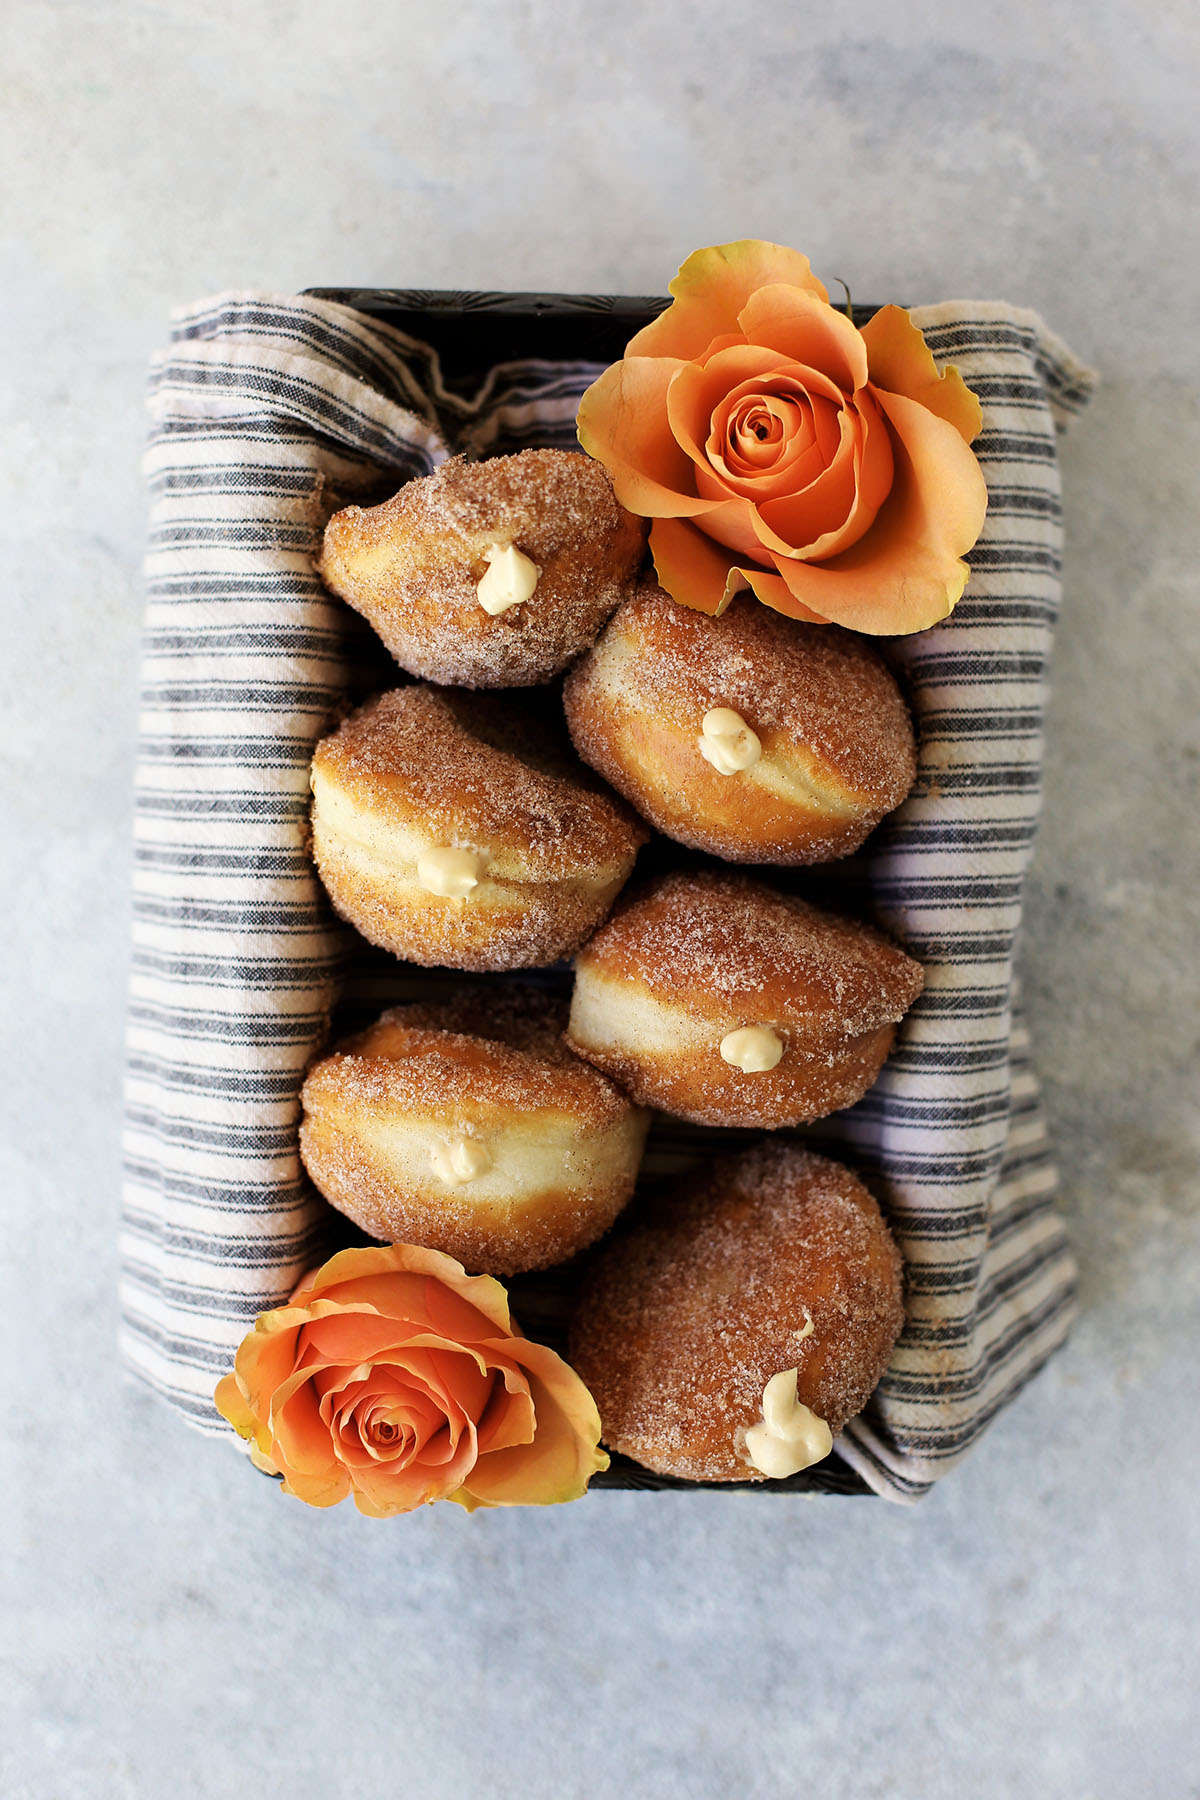 Salted Caramel Cream Cheese Filled Cinnamon and Sugar Donuts